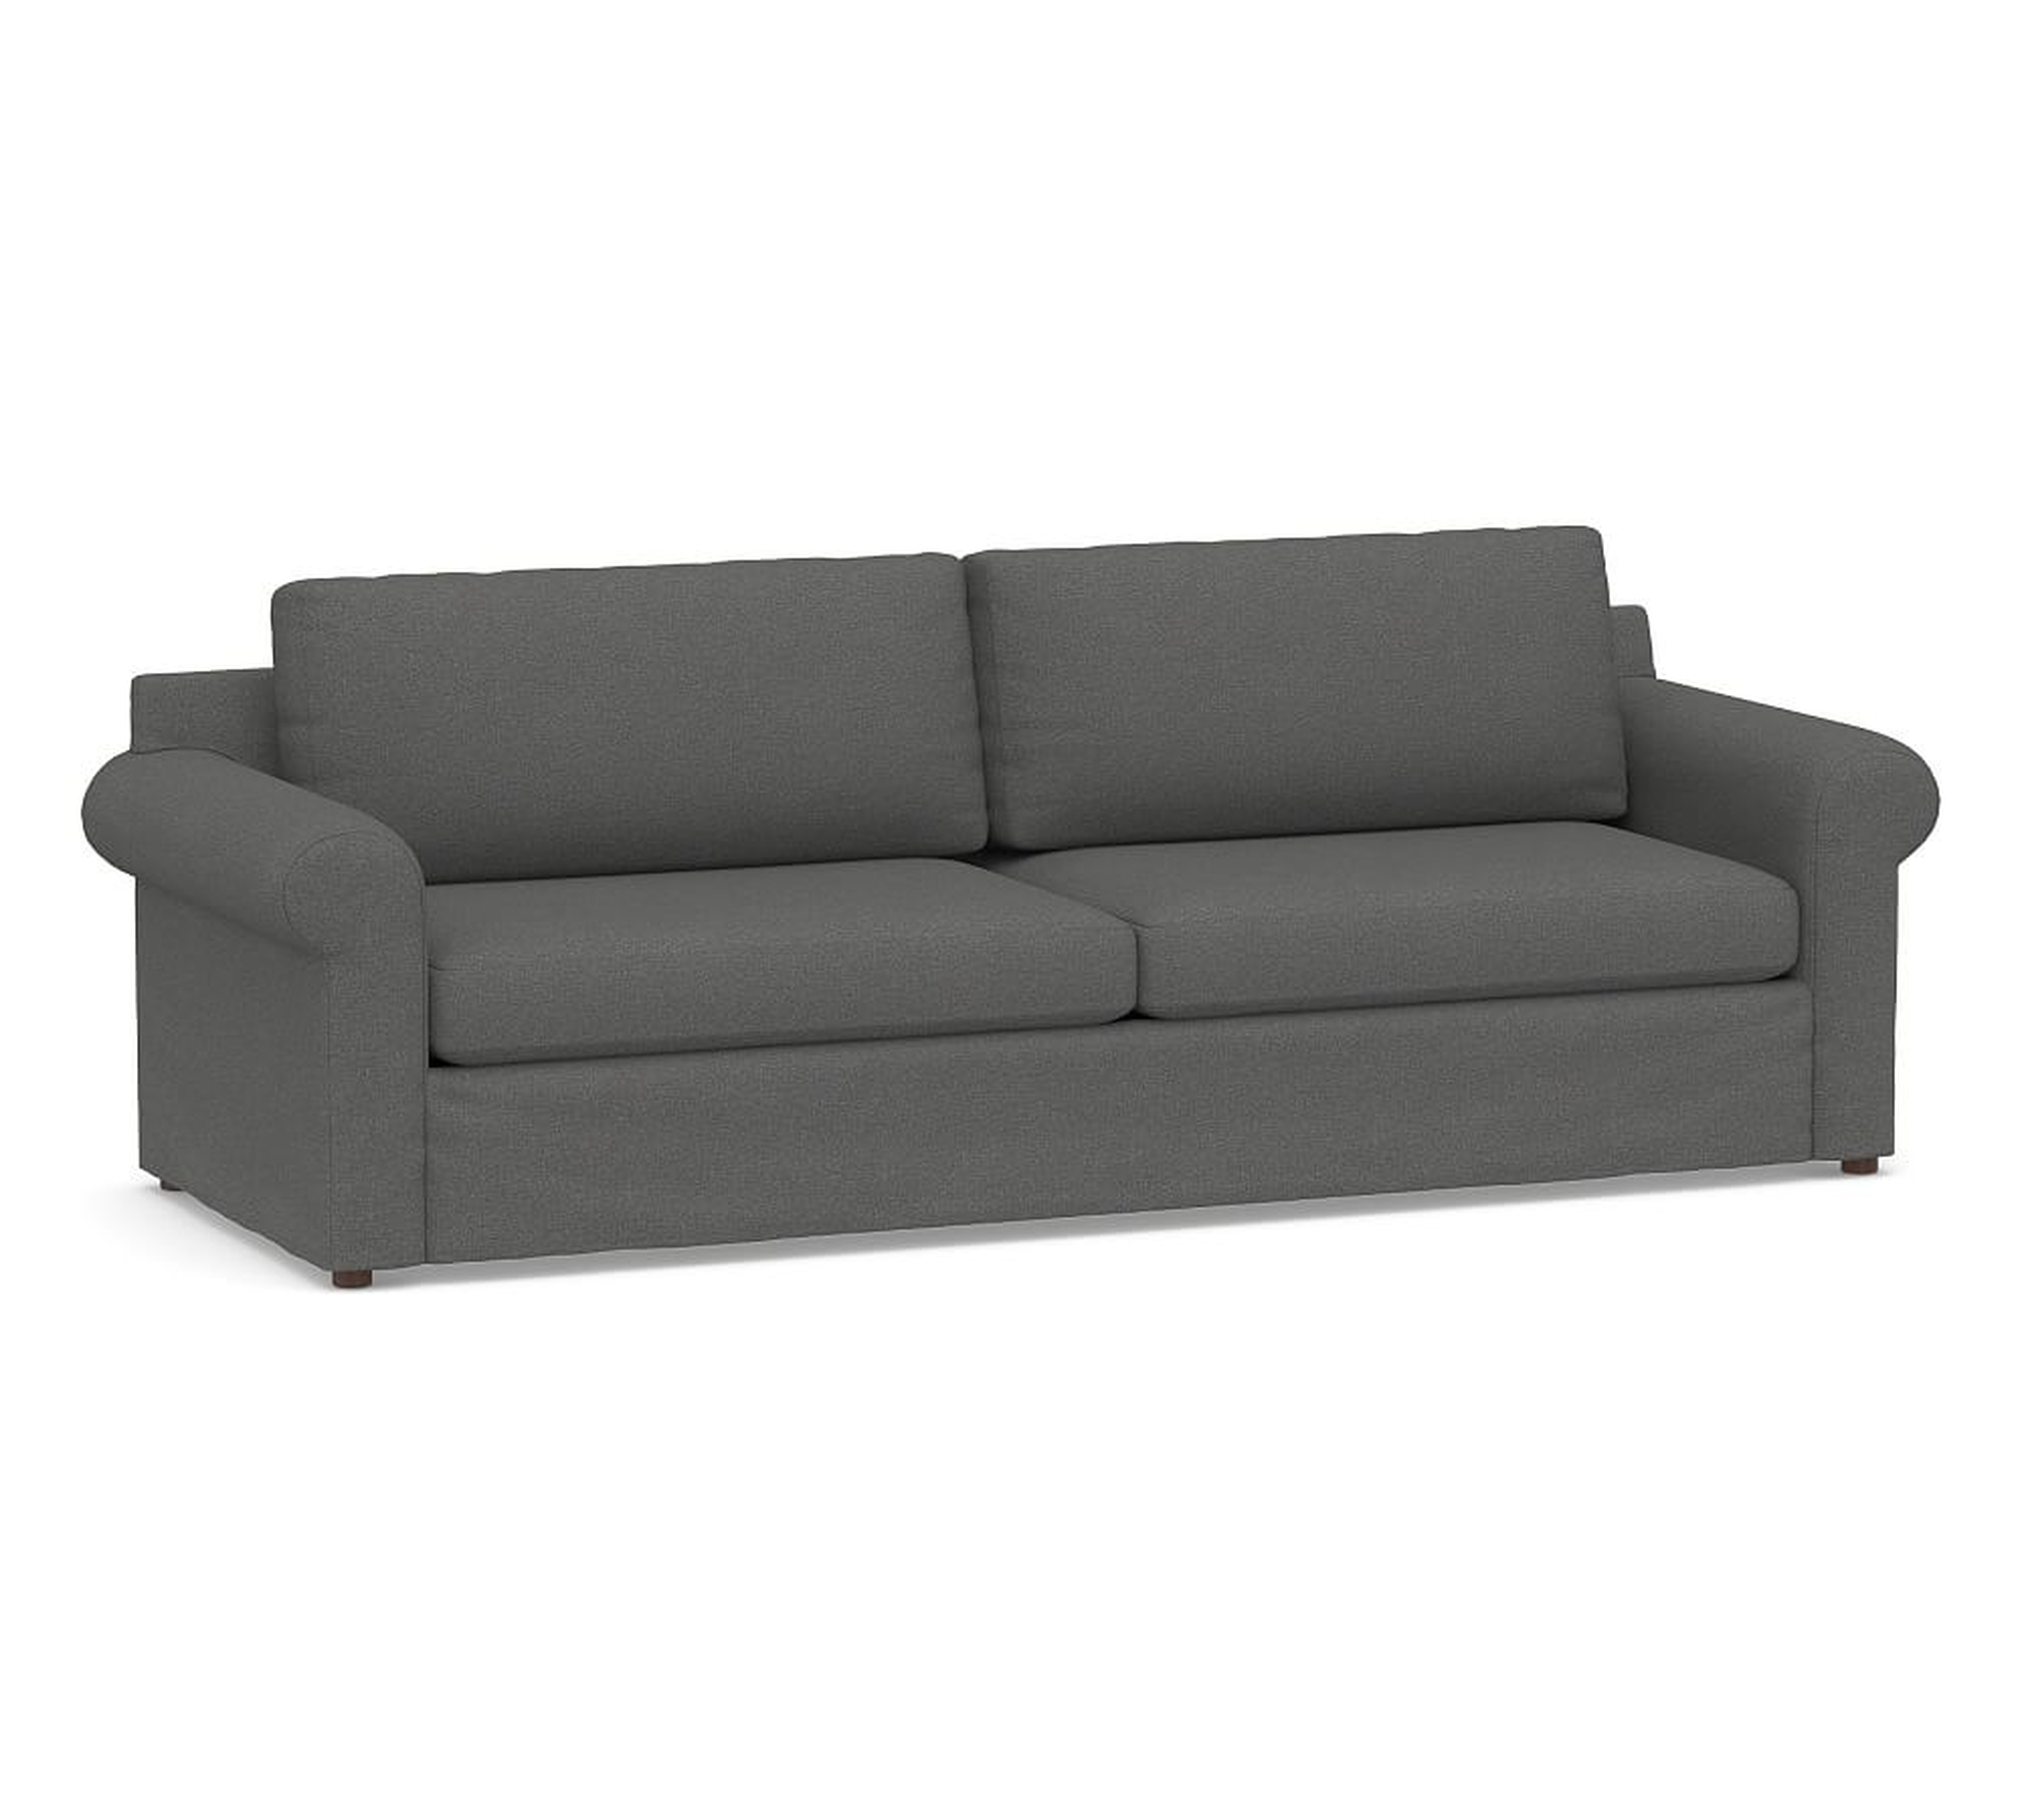 Shasta Roll Arm Slipcovered Grand Sofa, Polyester Wrapped Cushions, Park Weave Charcoal - Pottery Barn